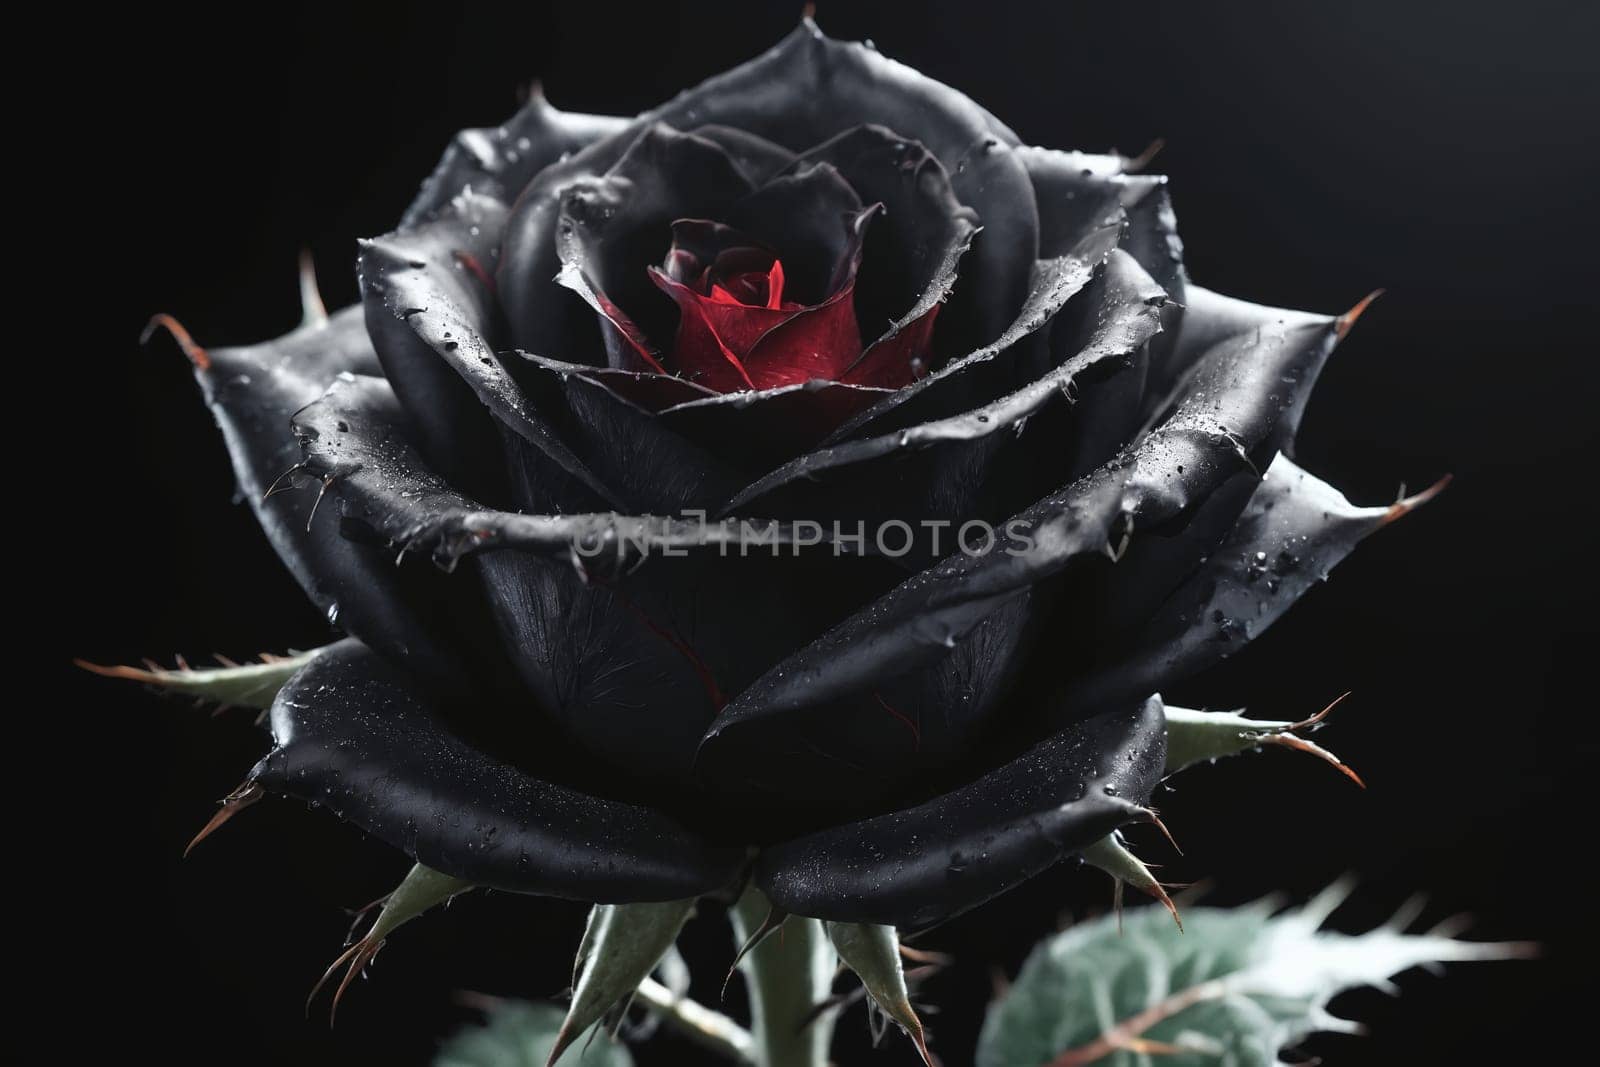 A rare contemplation of nature's diversity, captured in this surreal image of a unique rose reflecting stark contrast of black and red. Ideal for botanical educative content and to provoke engagement in social platforms.